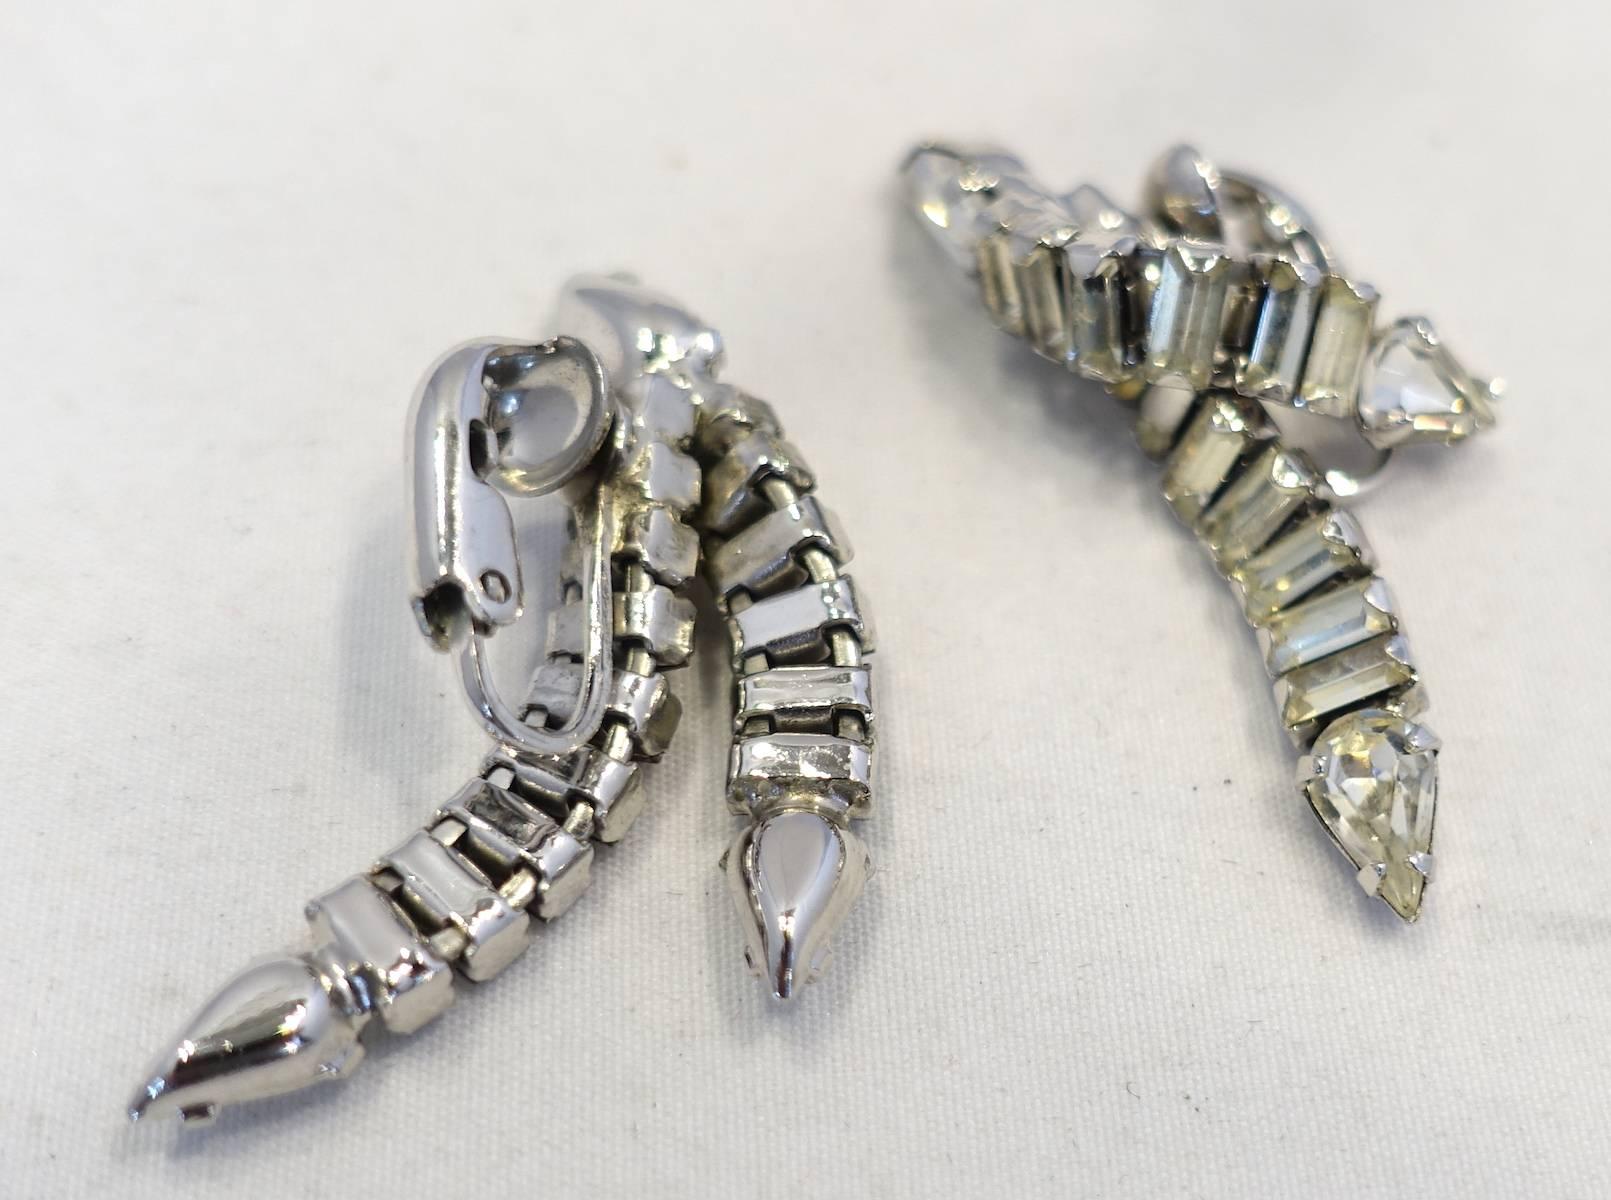 These vintage 1950s drop earrings feature two rows of clear crystals falling downward. They are in a silver tone setting.  These clip earrings measure 1-3/4” x 1/2” and are in excellent condition.